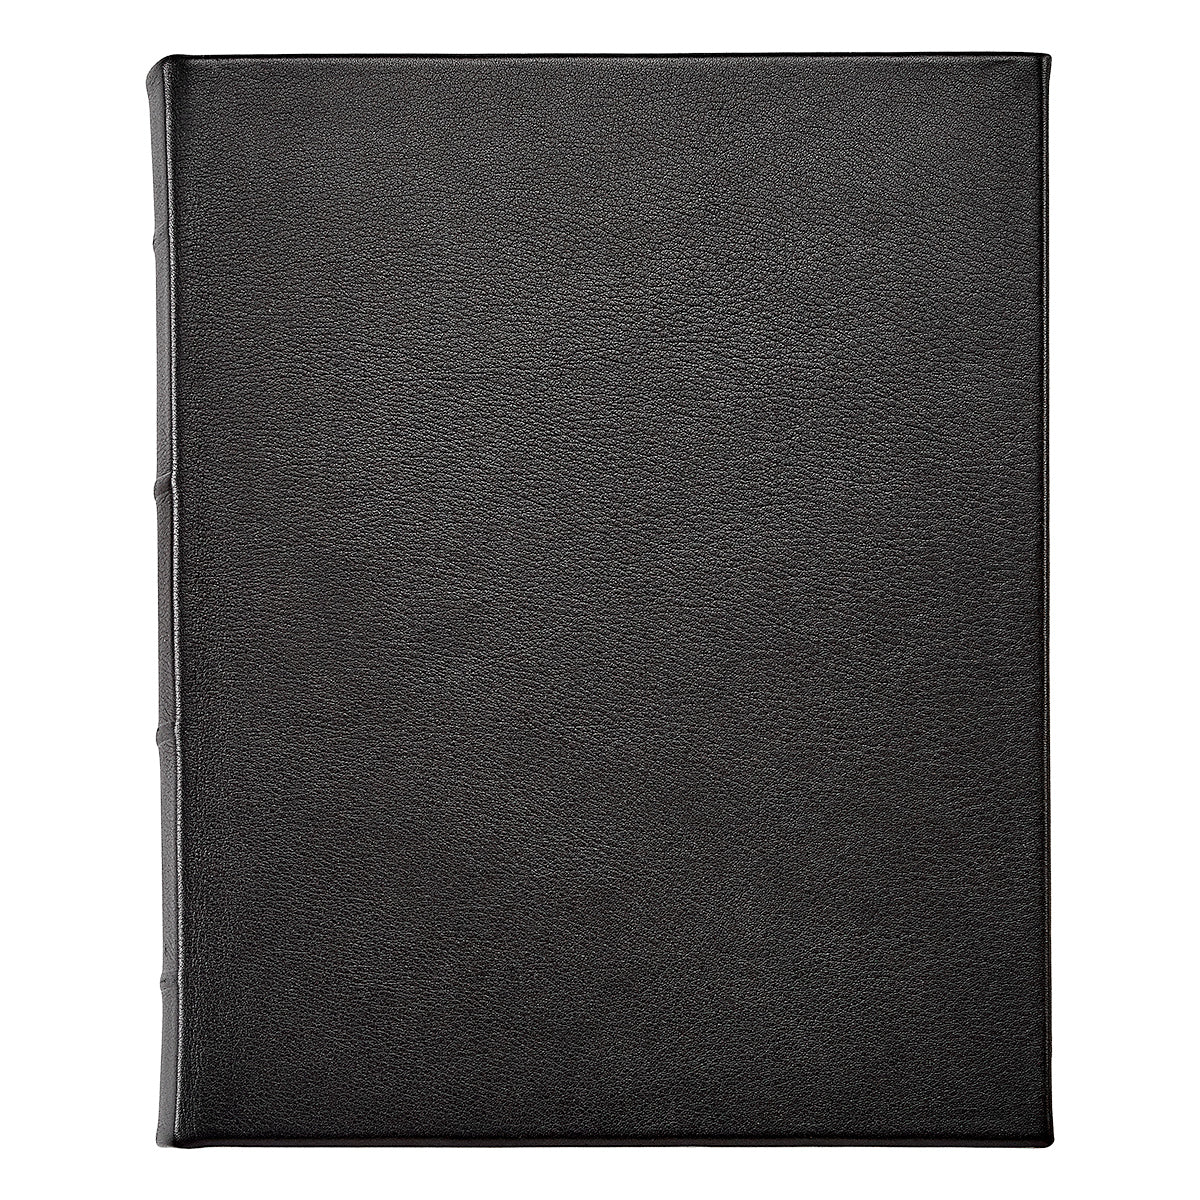 Graphic Image 11 Hardcover Unlined Manuscript Black Traditional Leather